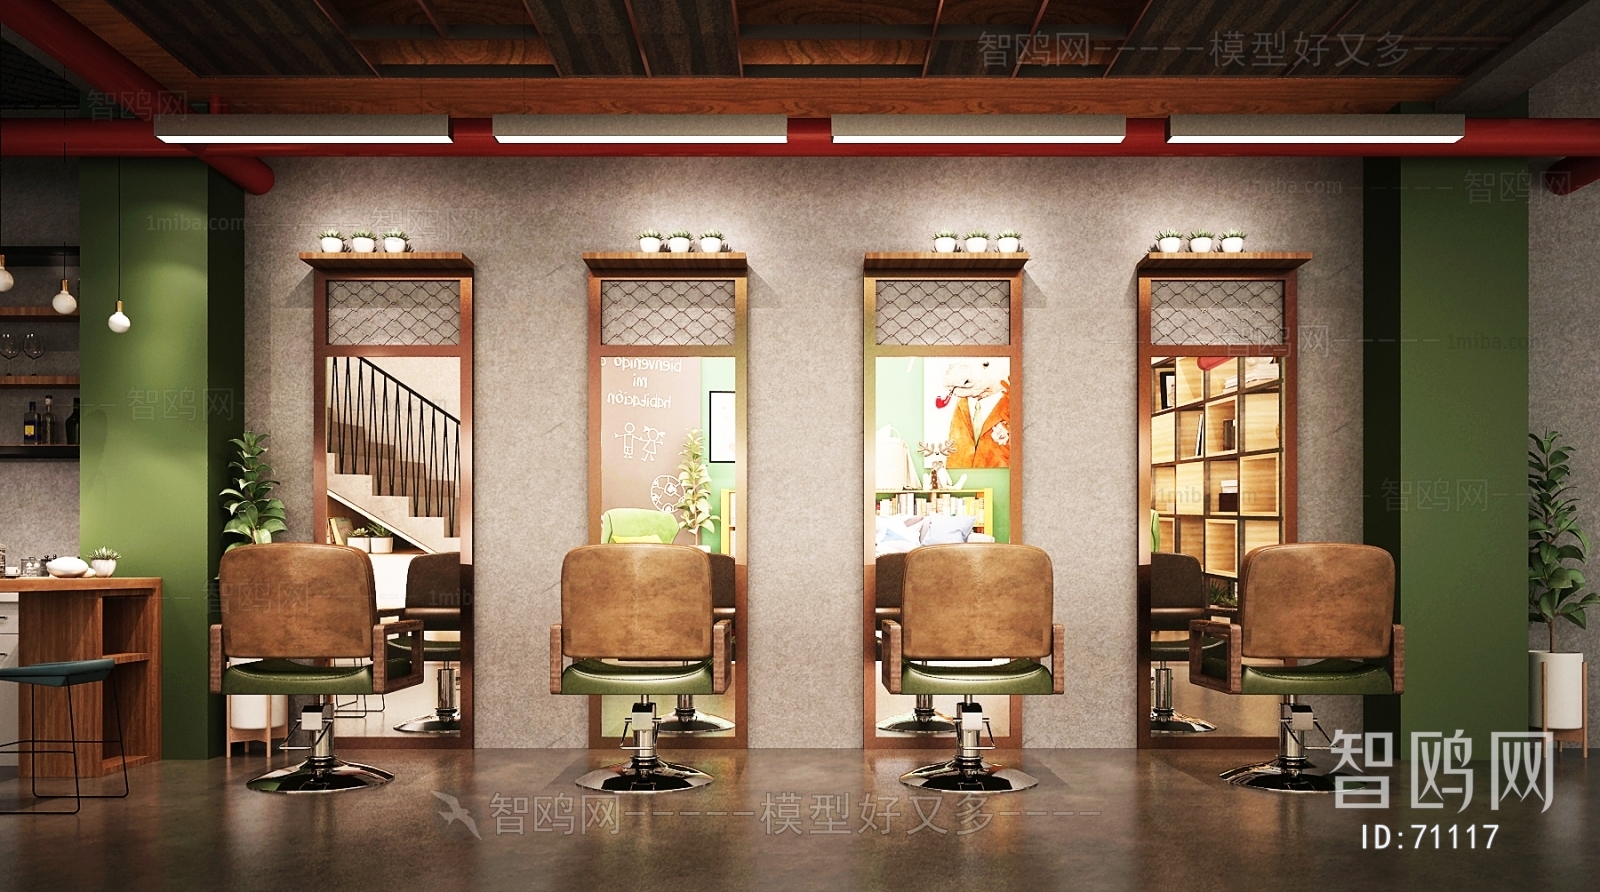 Industrial Style Beauty And Hairdressing